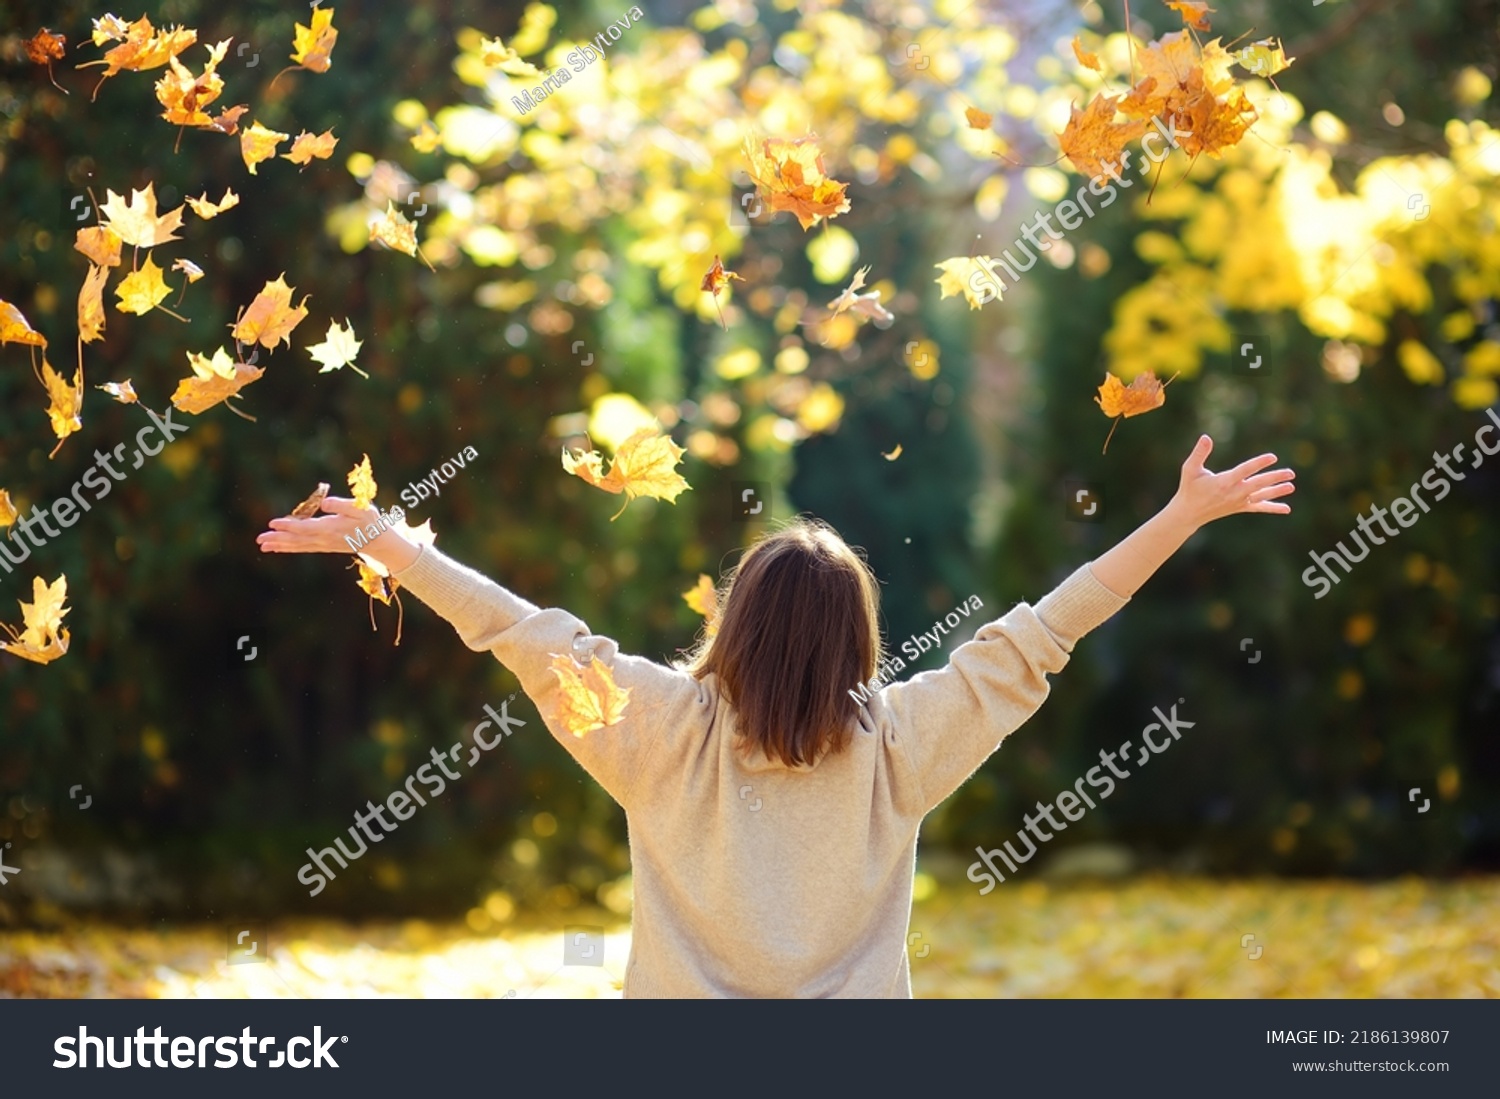 Young woman is having fun while walking through the forest on a sunny autumn day. Girl plays with maple leaves and throws them up. Fallen leaves rustle. #2186139807